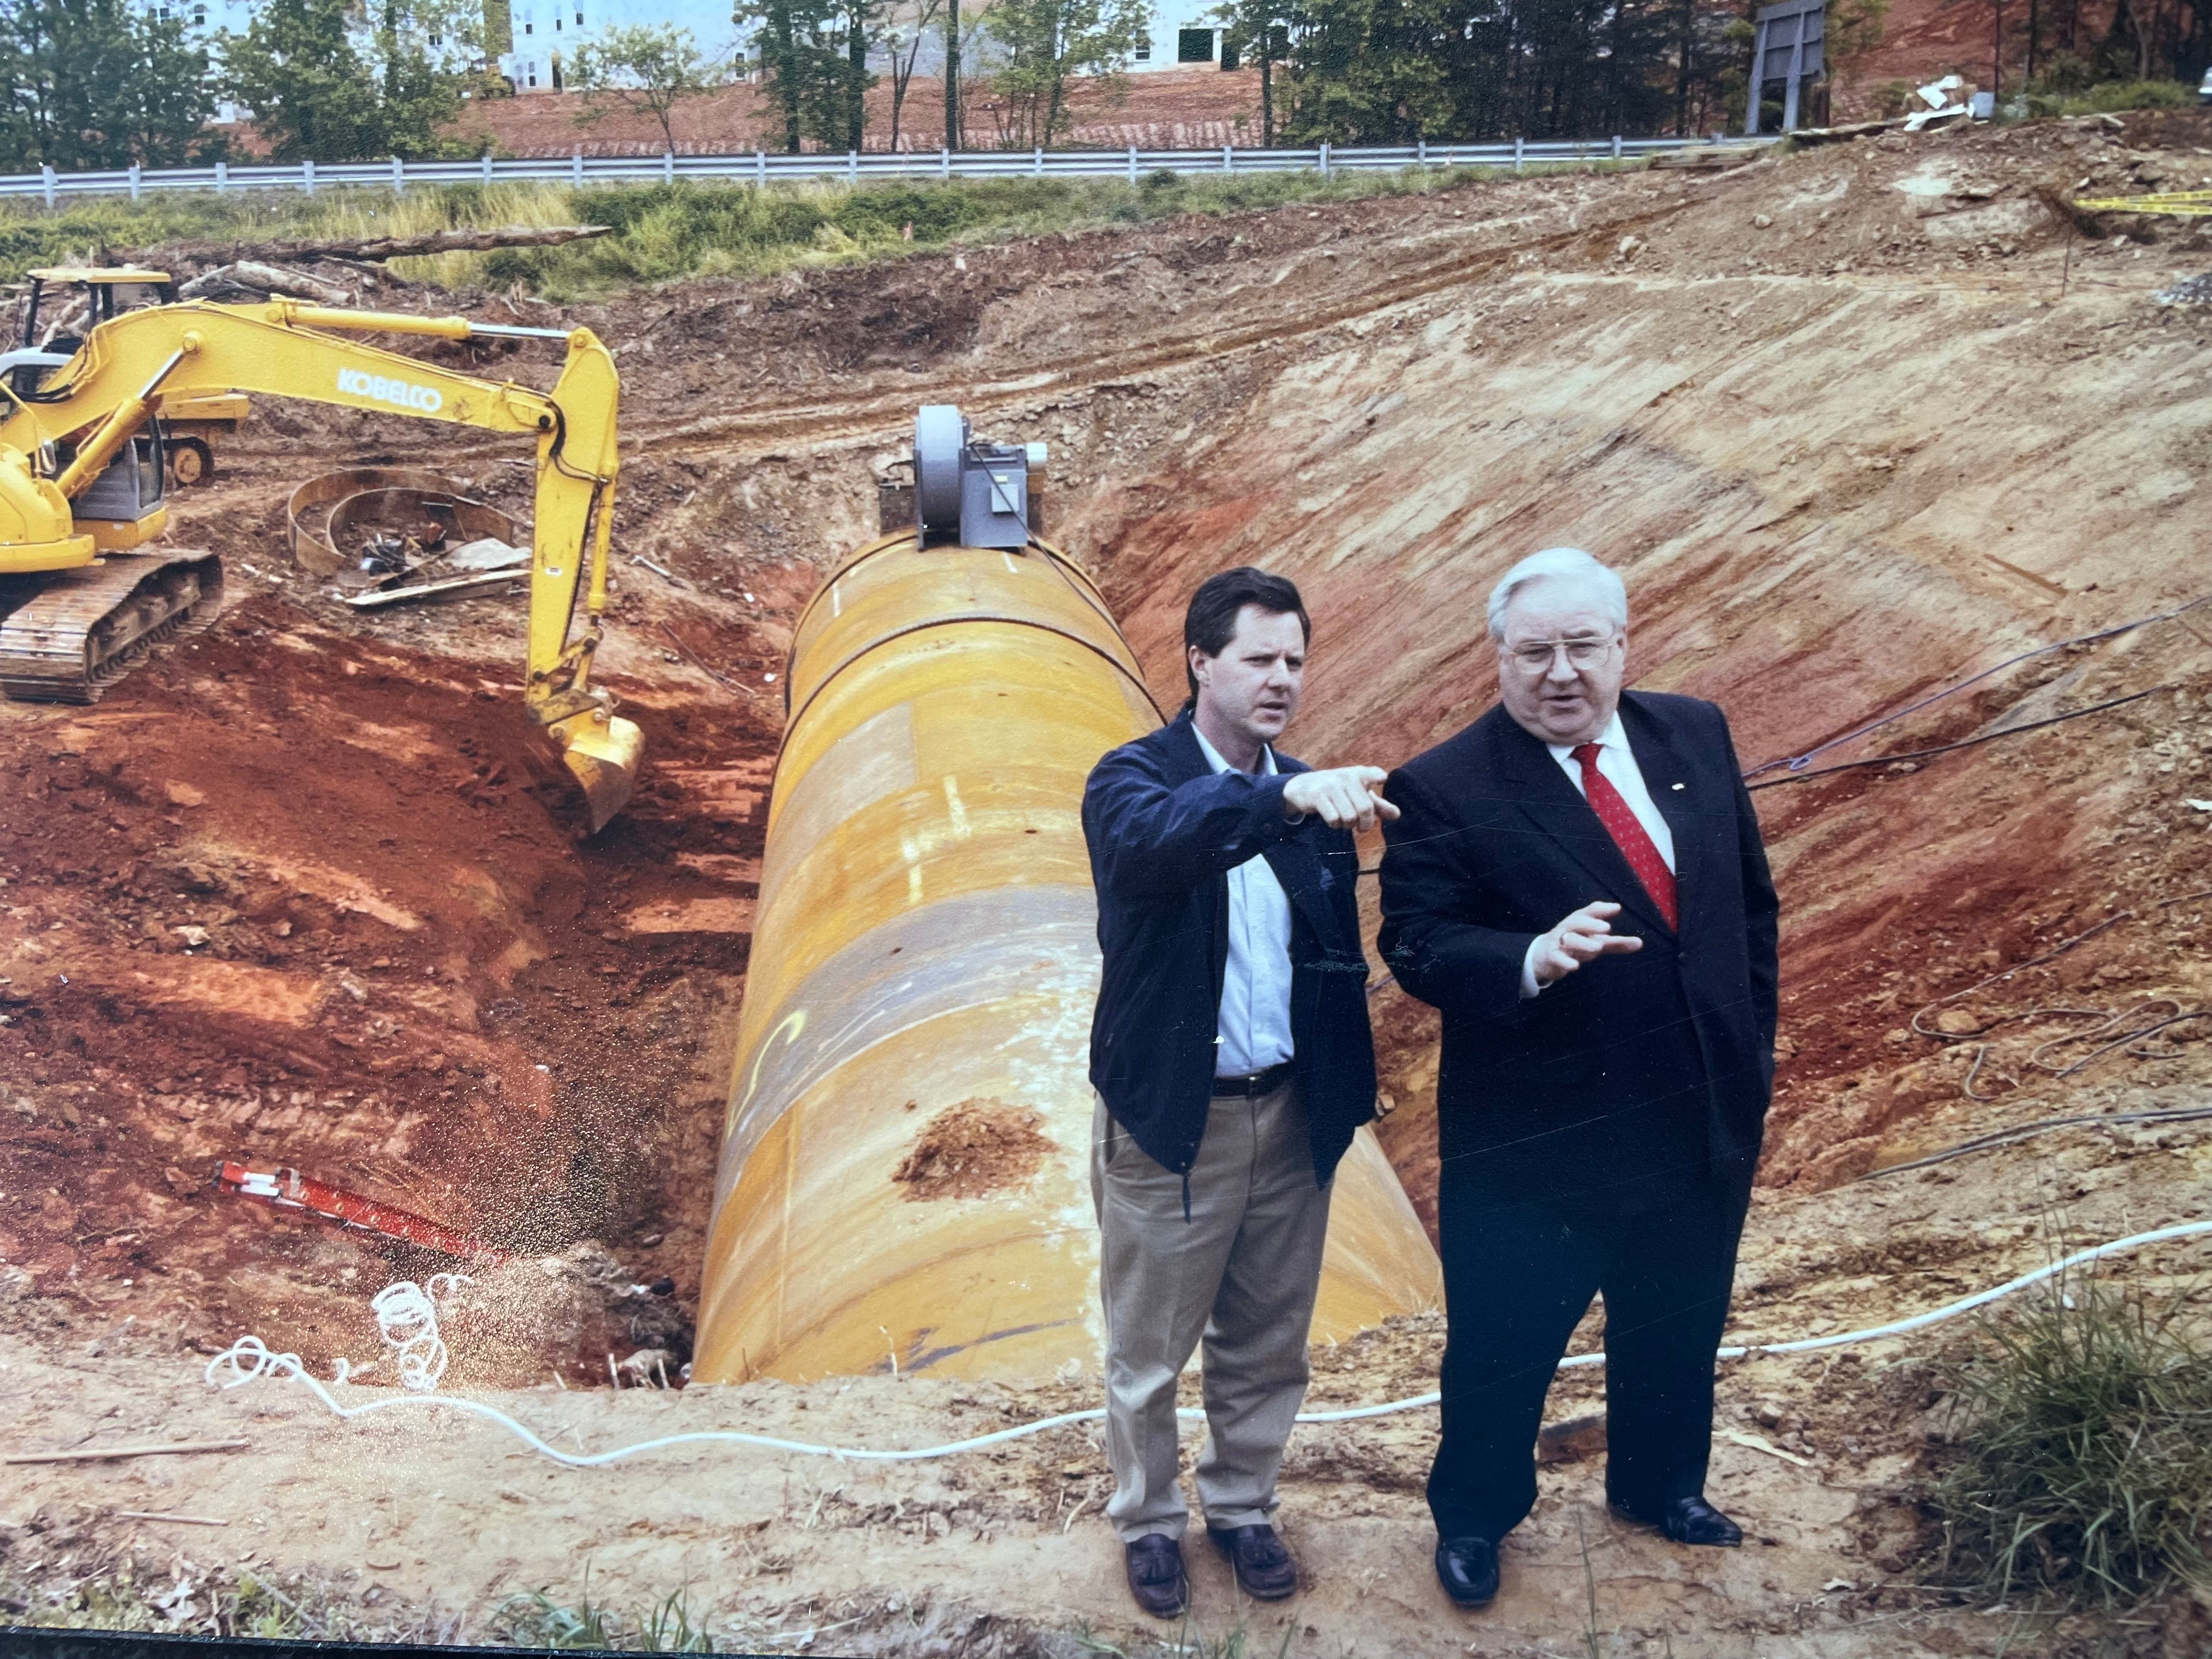 Jerry Falwell Jr. and his father stand in the middle of a construction site, in front of a yellow bulldozer.